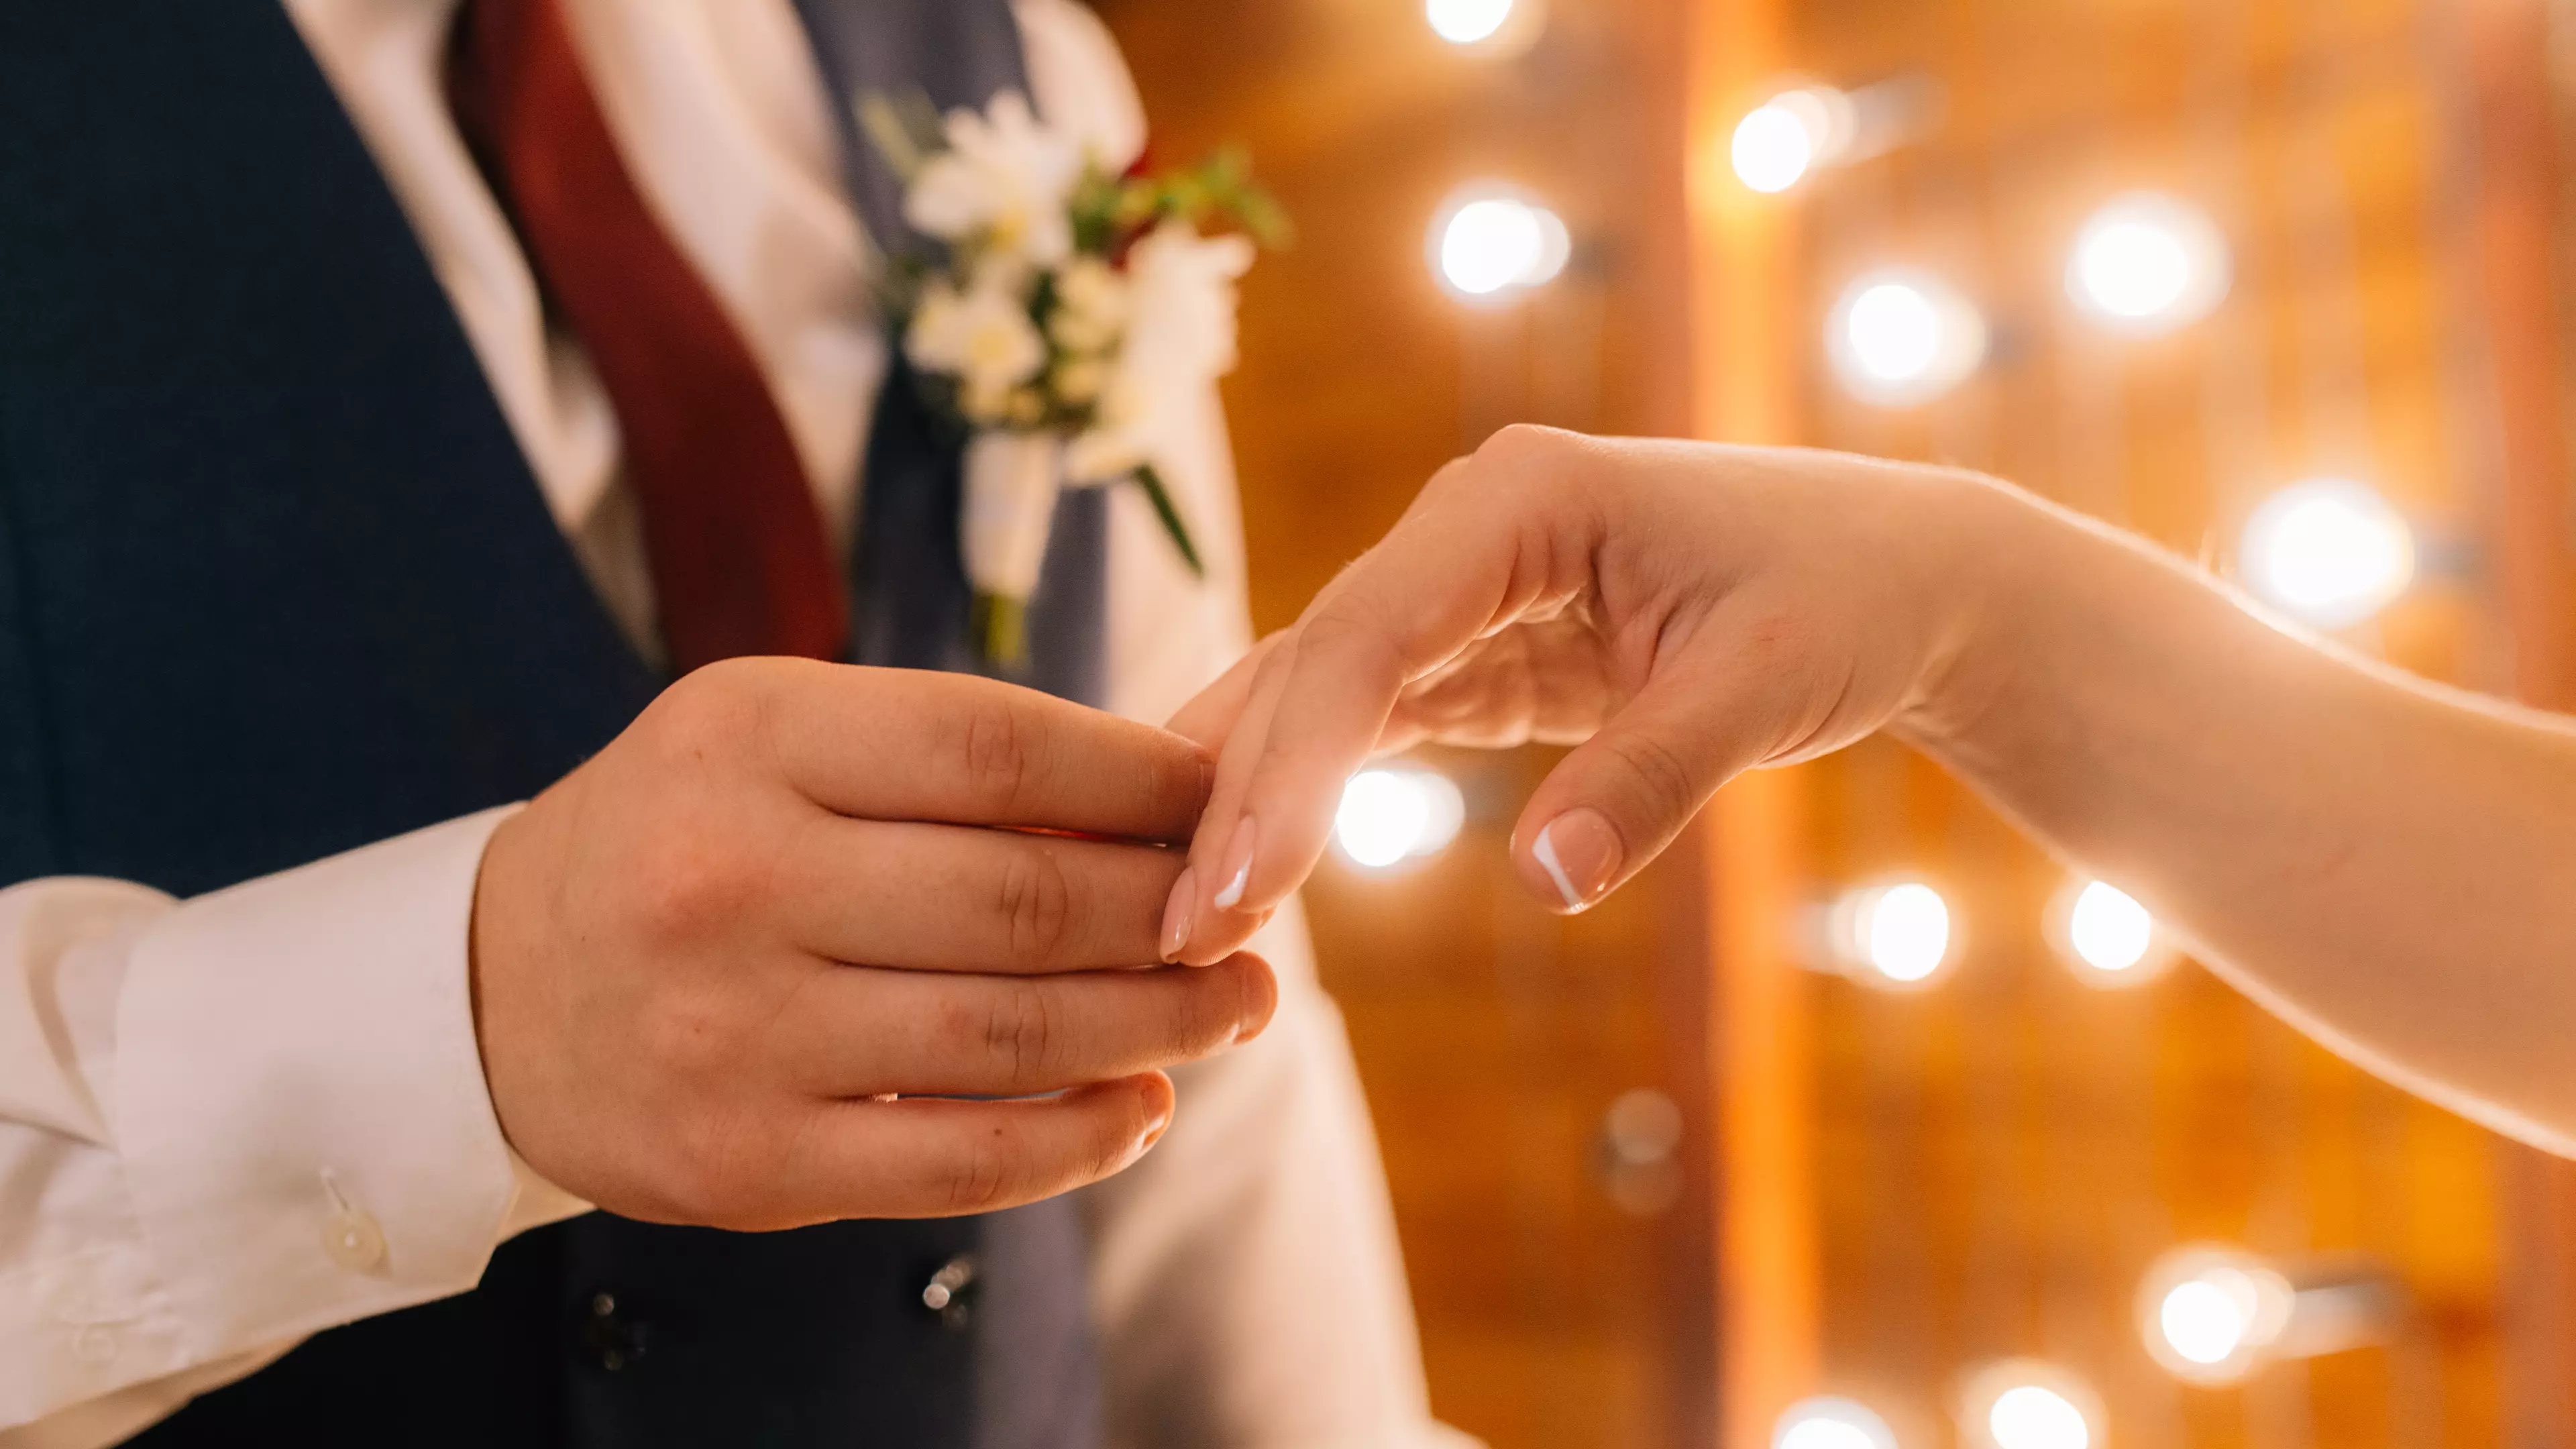 Woman Sparks Debate After Refusing To Let Friend Propose At Her Wedding